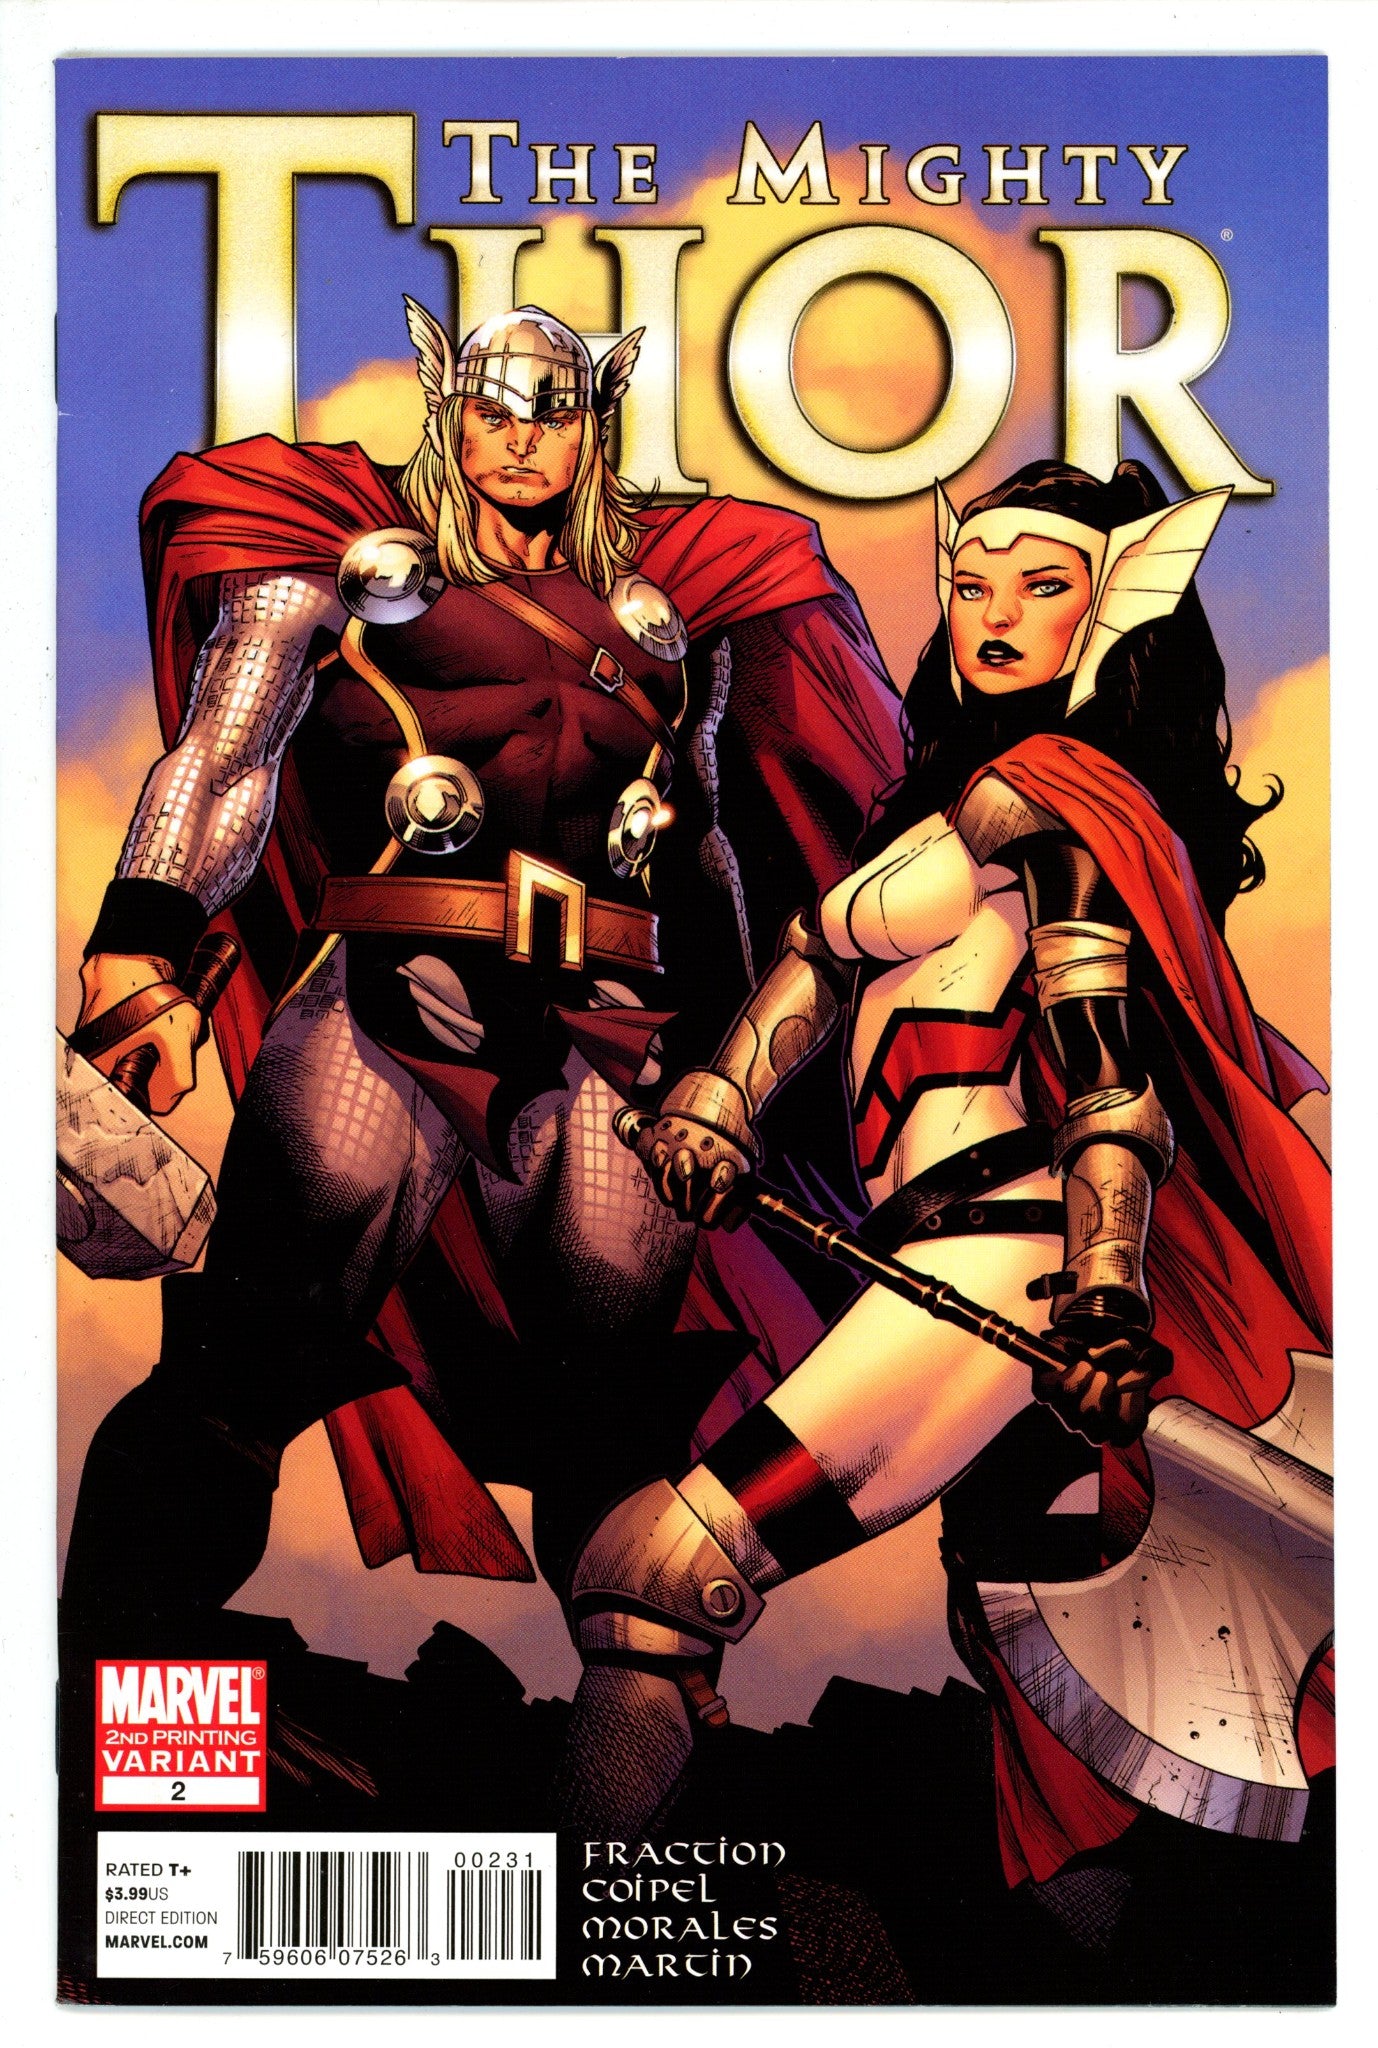 The Mighty Thor Vol 1 2 2Nd Print VF/NM (2011)